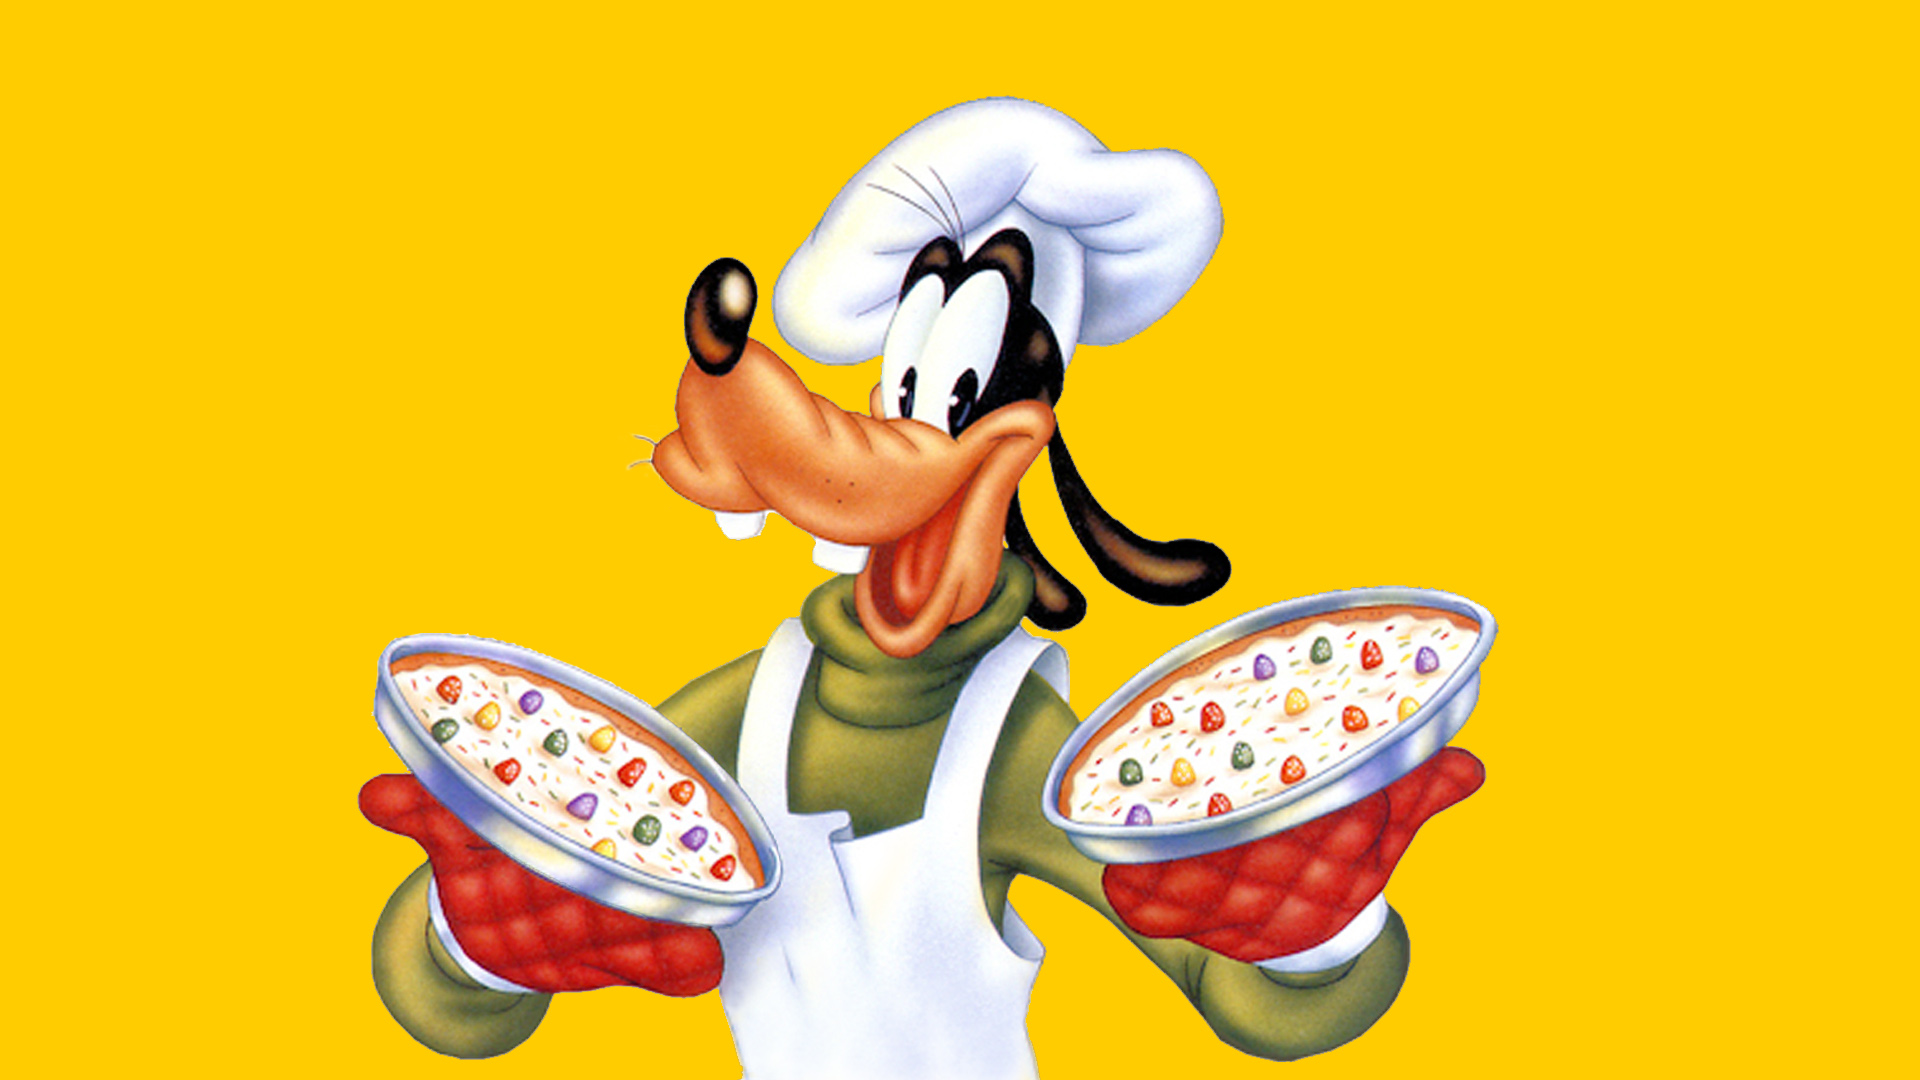 Cartoon Characters Goofy Pizza Disney Recipes Desktop Background For Mobile And Tablet 1920x1080, Wallpaper13.com